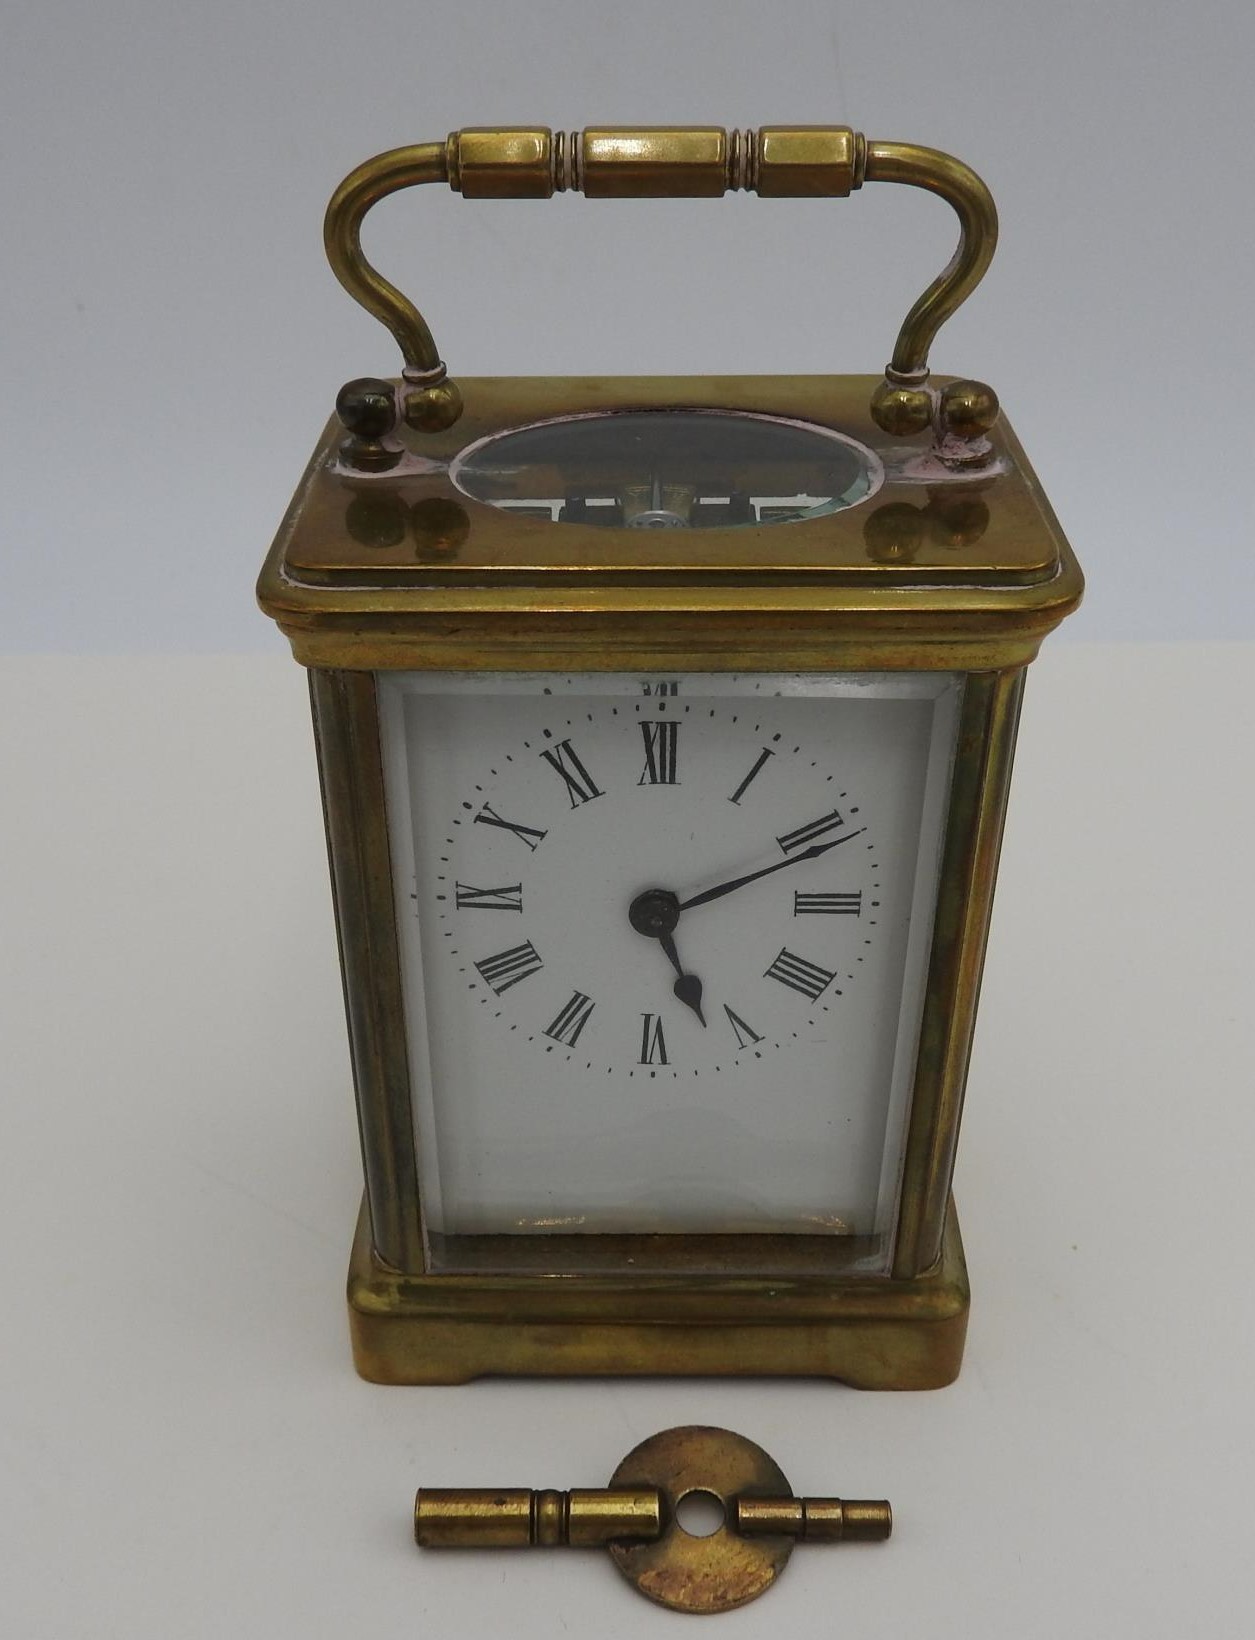 AN EARLY 20TH CENTURY ENGLISH BRASS CARRIAGE CLOCK, 11cm high, with winding key, in working order - Image 2 of 5